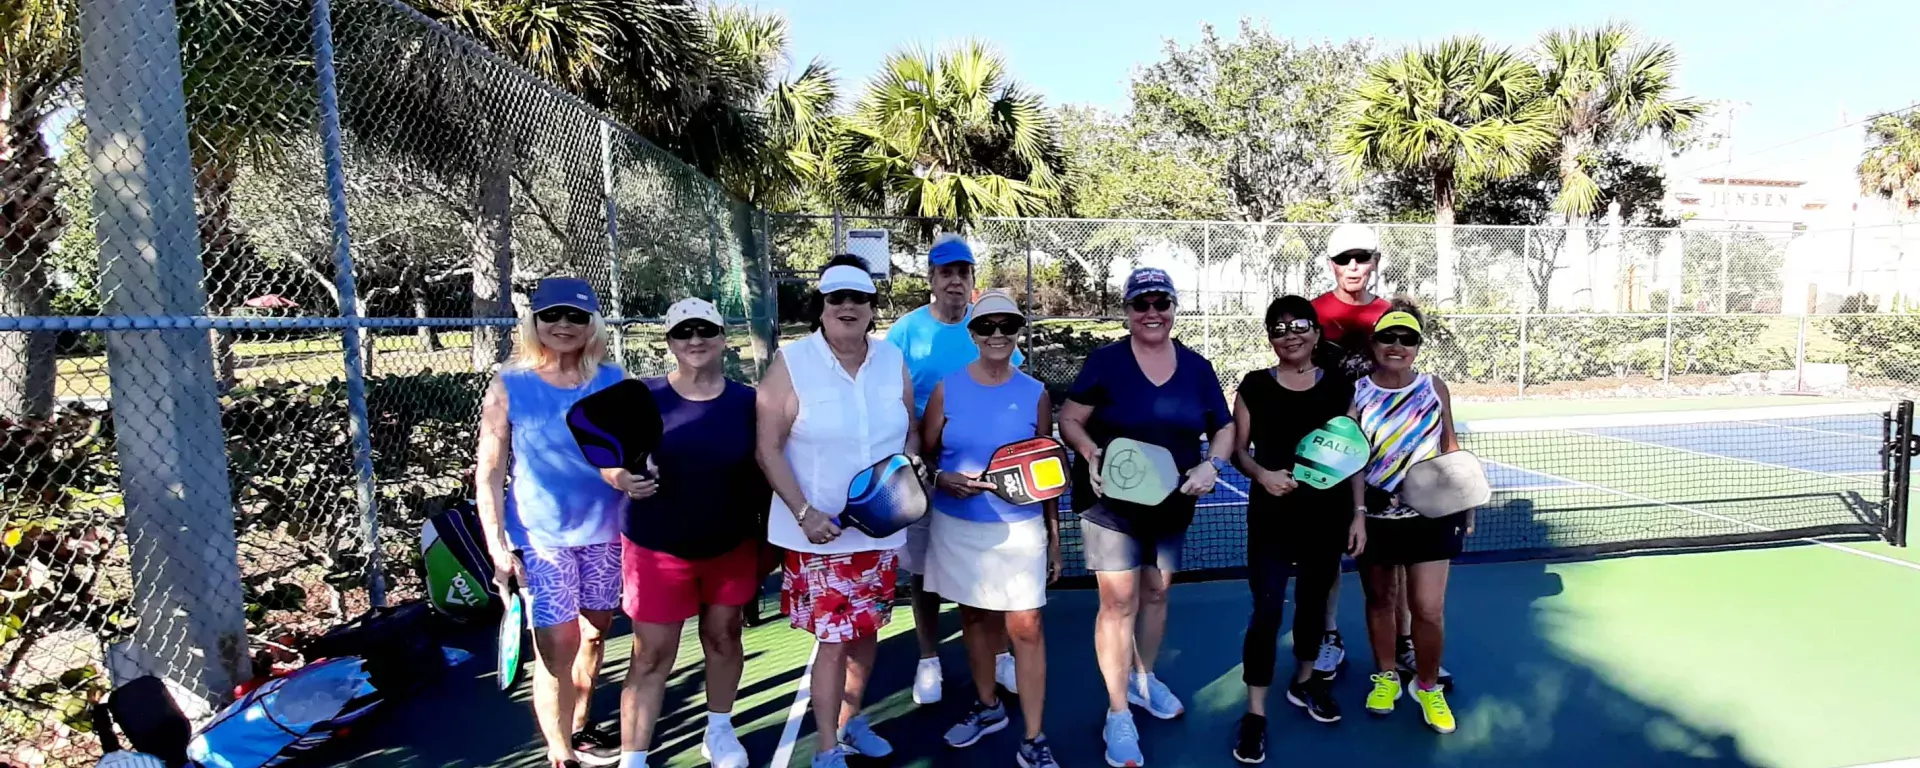 Image of participants during a introduction to pickleball clinic held at the Log Cabin Senior Center in Jensen Beach, FL.